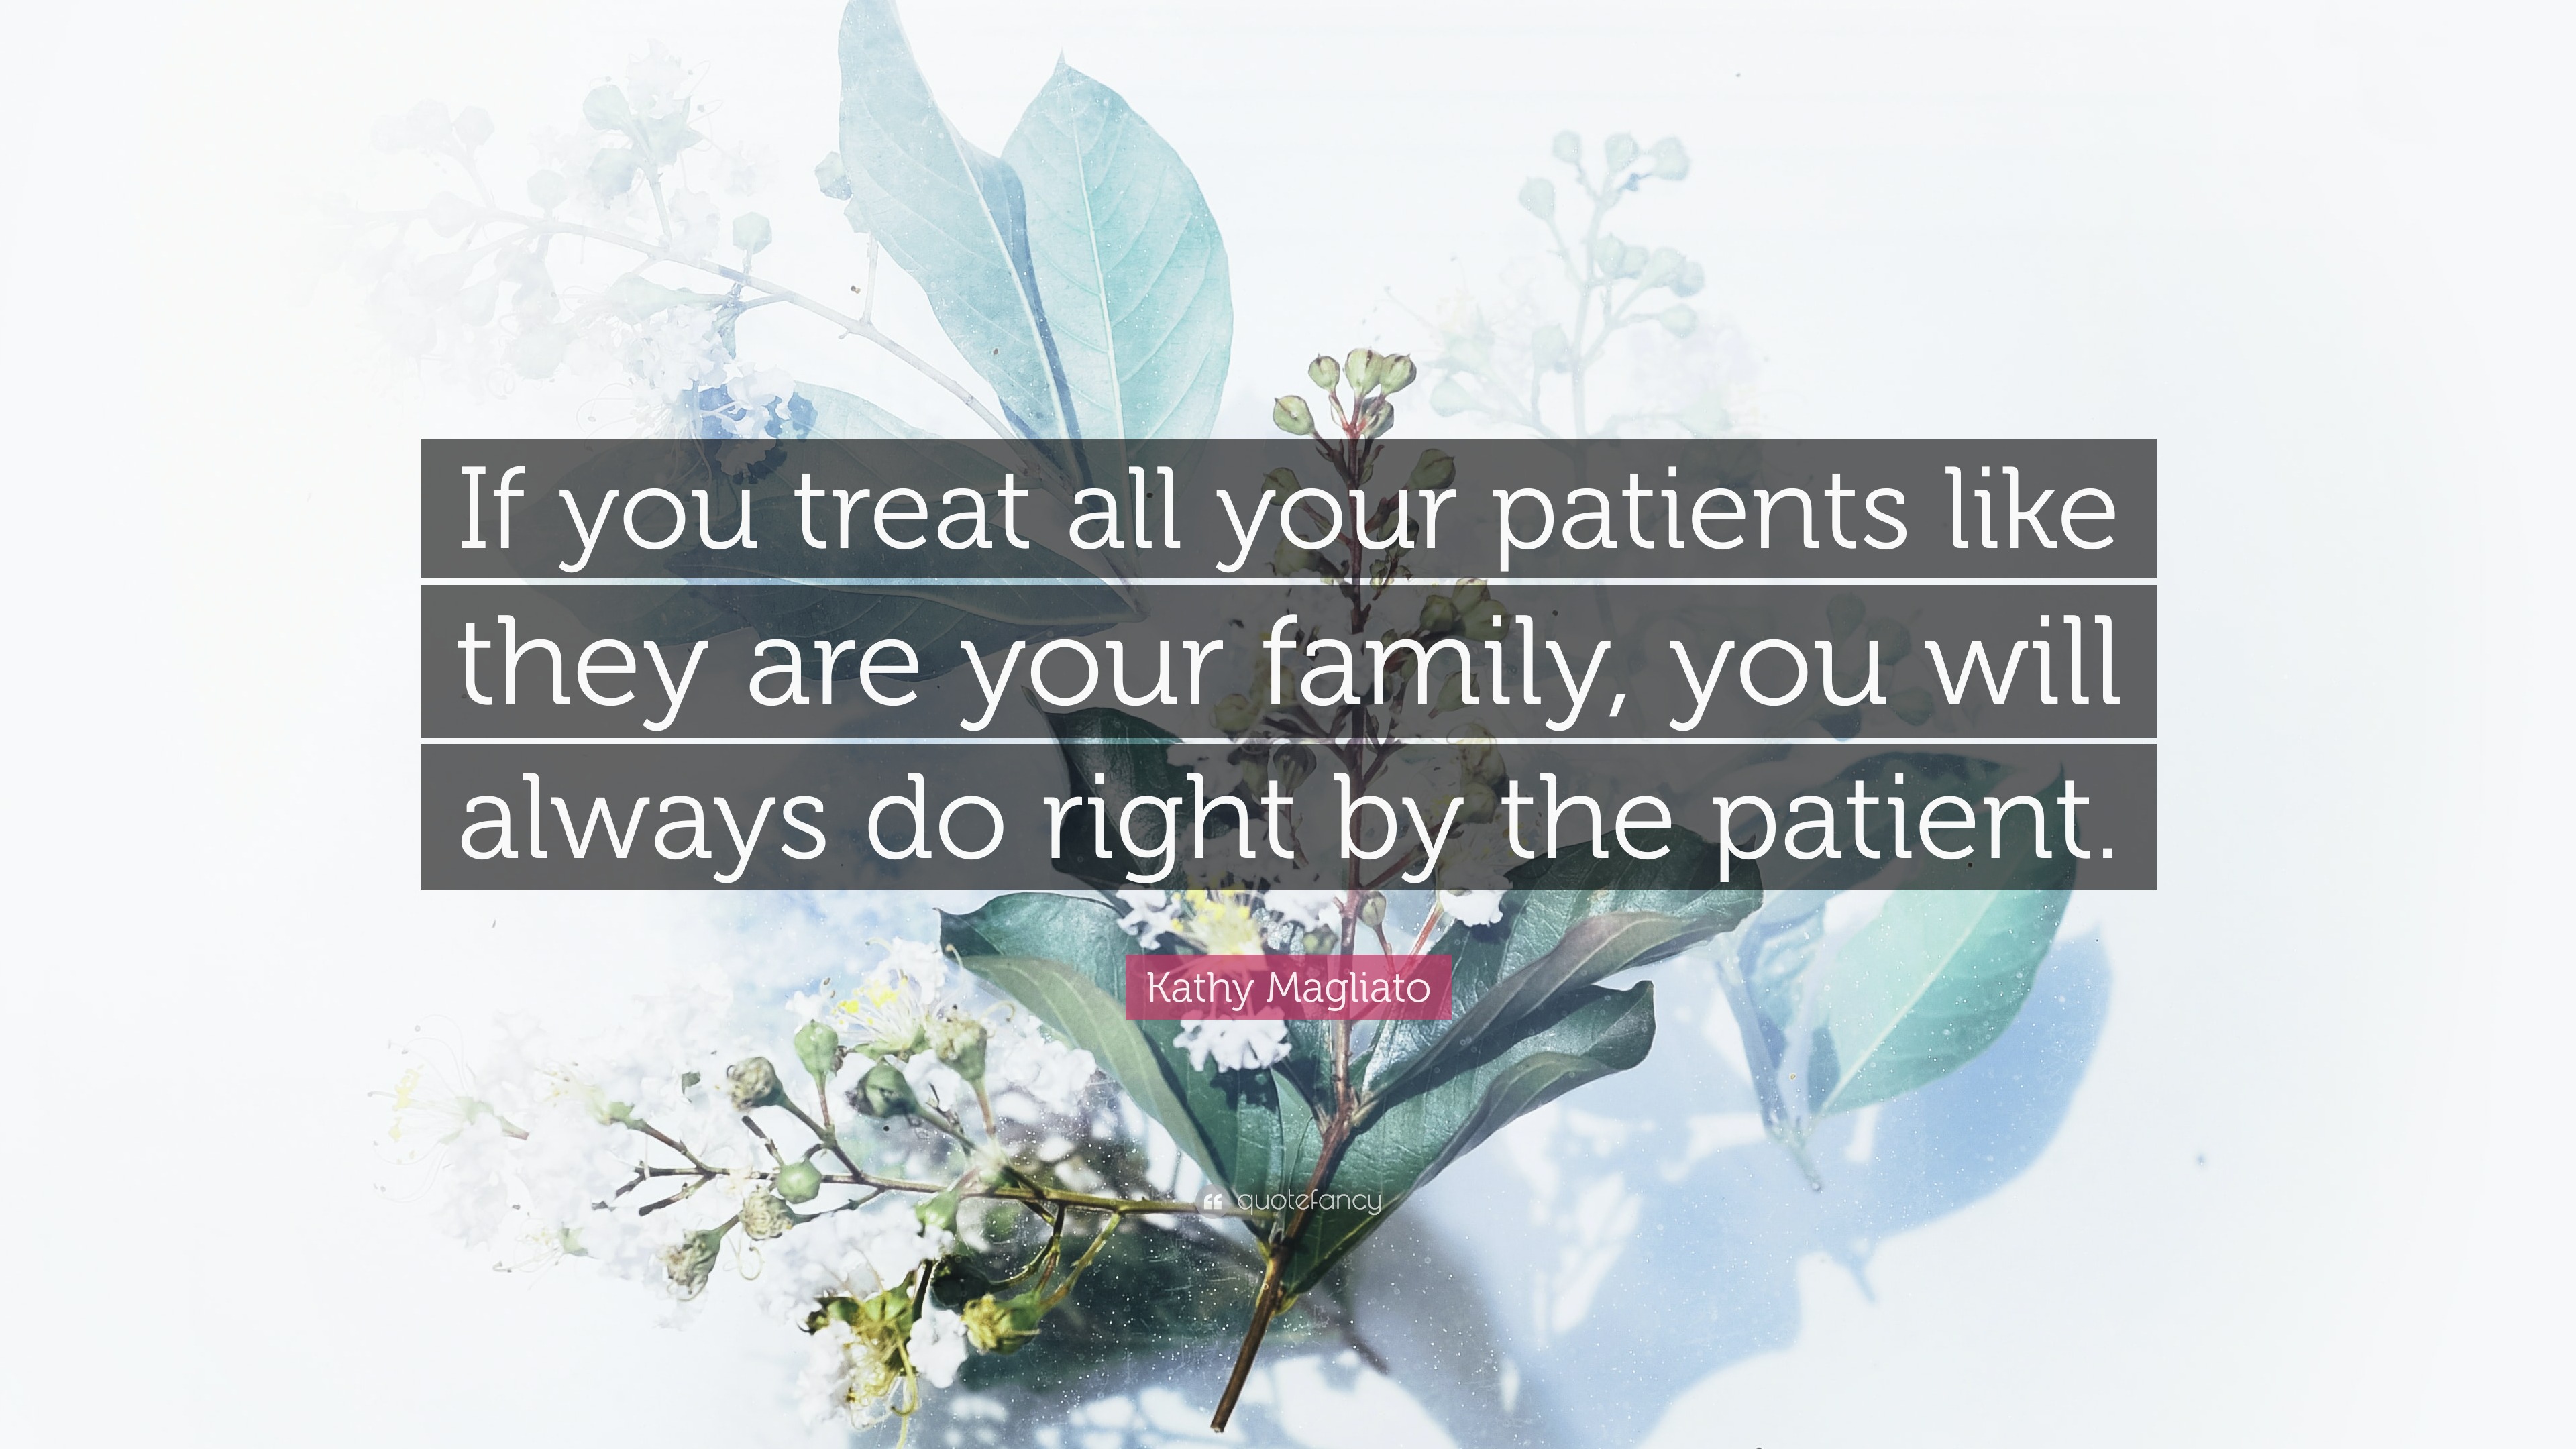 https://quotefancy.com/media/wallpaper/3840x2160/7740661-Kathy-Magliato-Quote-If-you-treat-all-your-patients-like-they-are.jpg